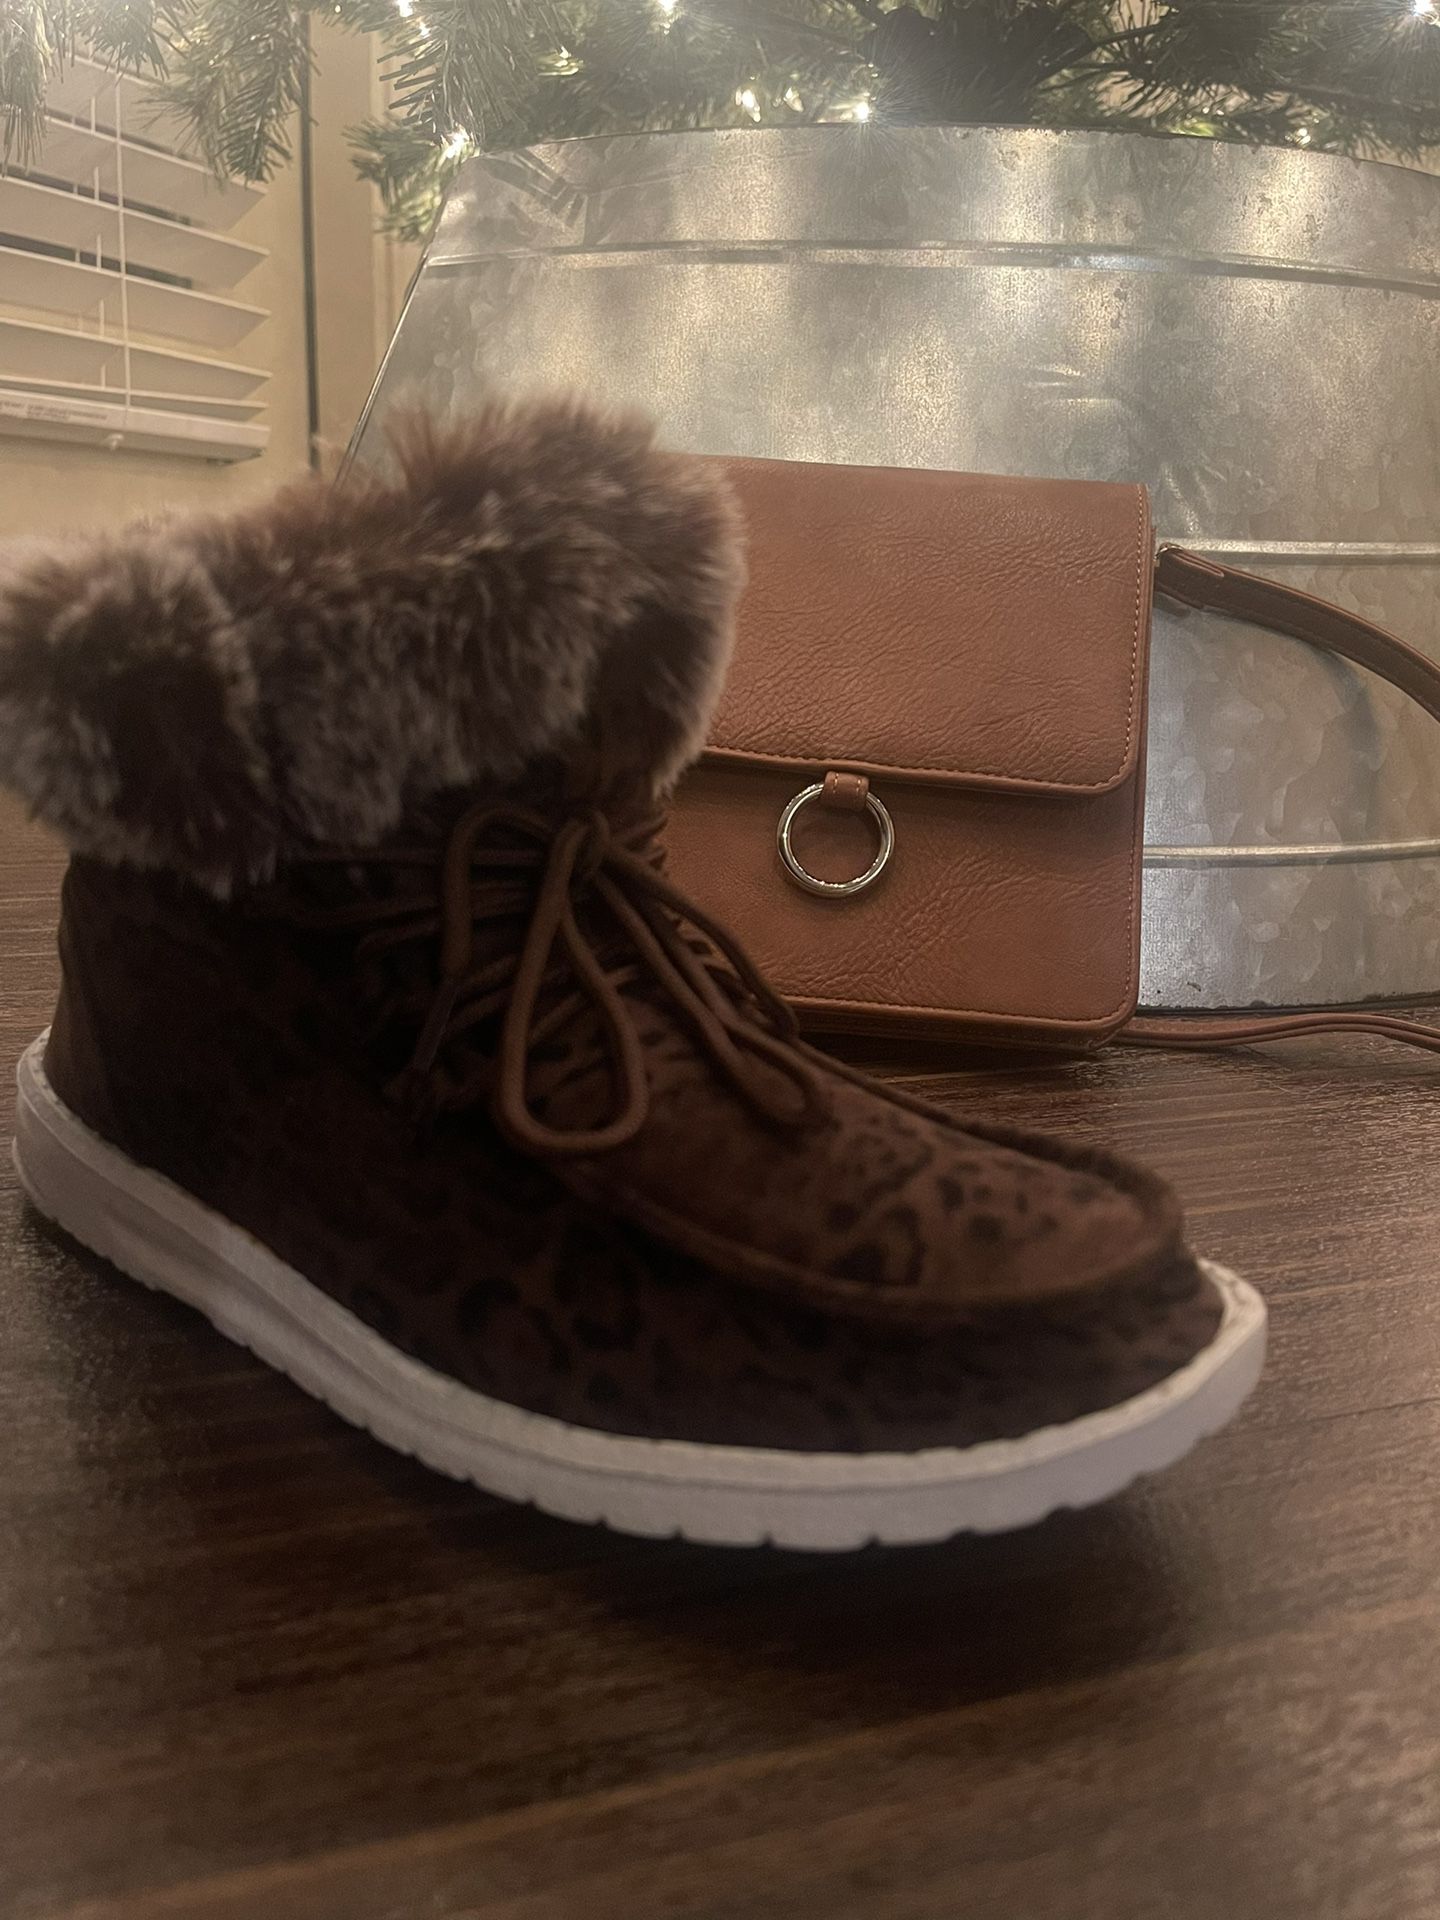 Brand New Fancy Taupe Winter Boots Snow Boots Cheap W/Purse $65